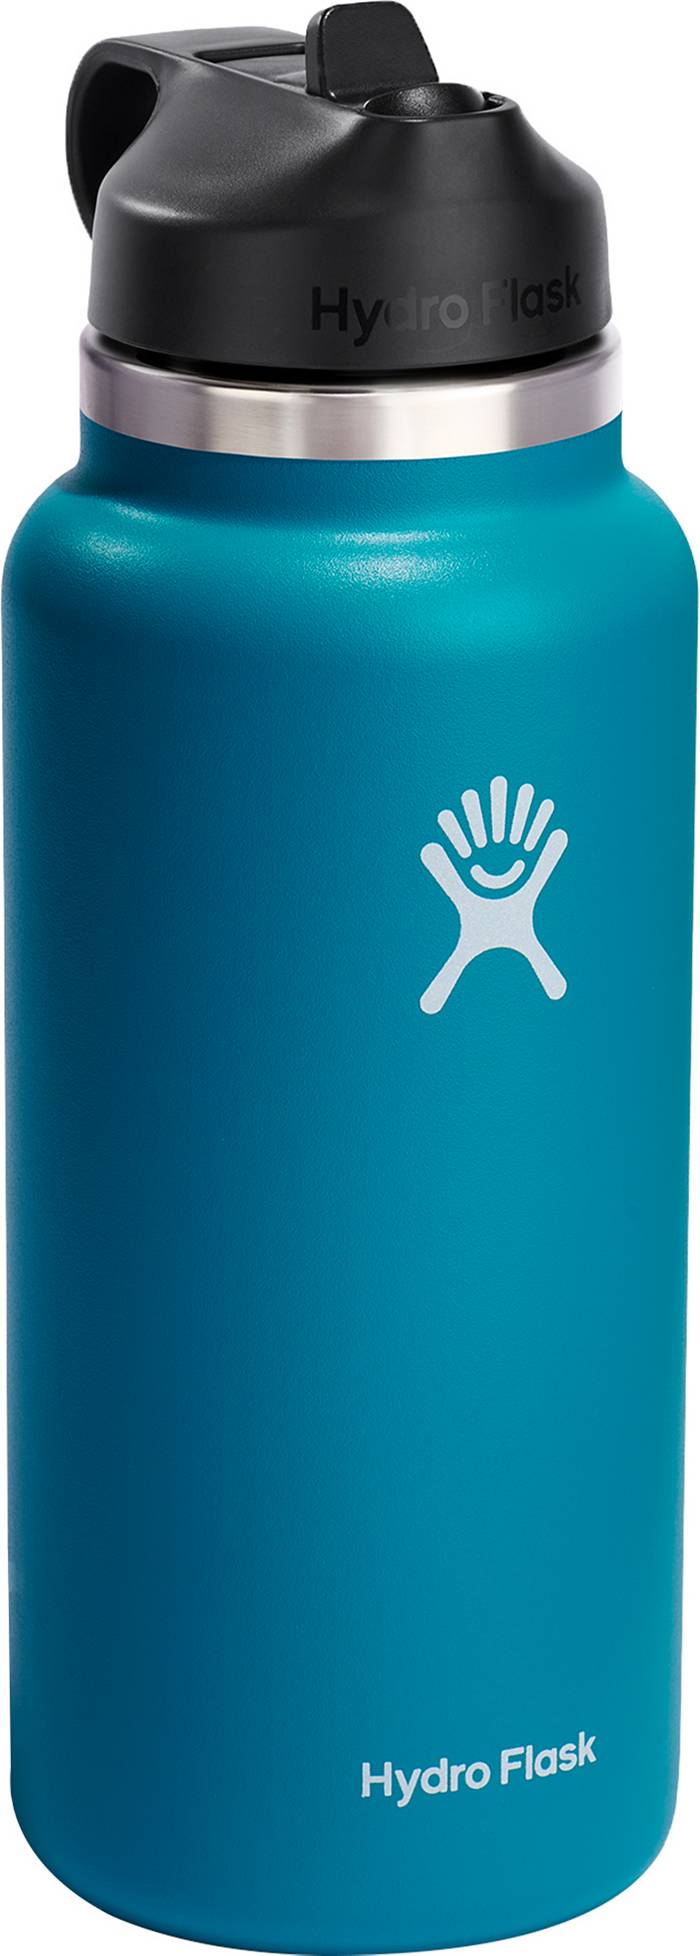 Hydro Flask 40 oz Wide Mouth w/ Extra Lids for Sale in West Covina